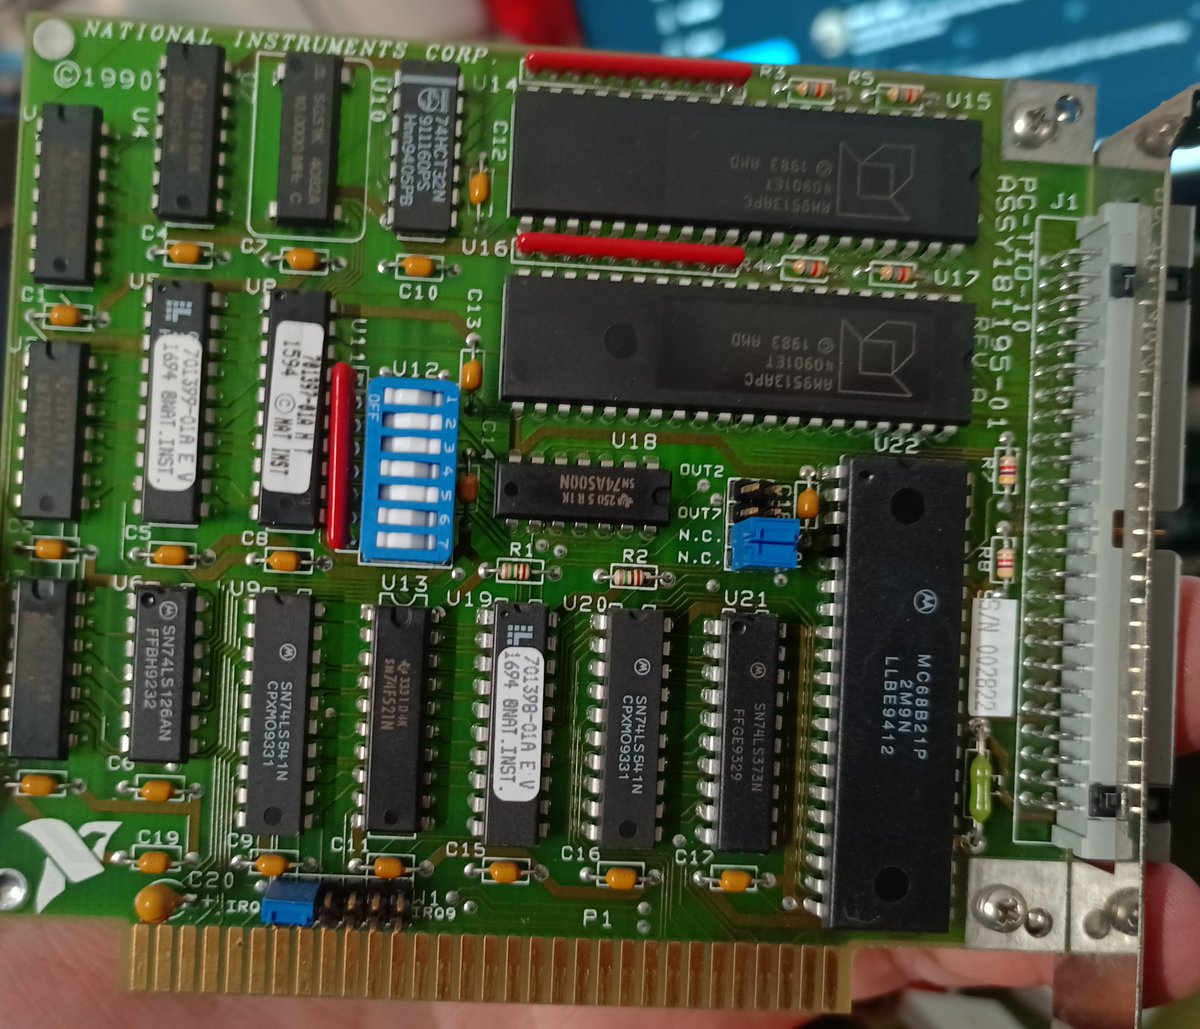 So, the next card! It's not SCSI, it's a National Instruments thing. A PC-TIO-10.That's a "timing and digital interface for the PC"So it's used for measuring pulses and generating waves.Neat.